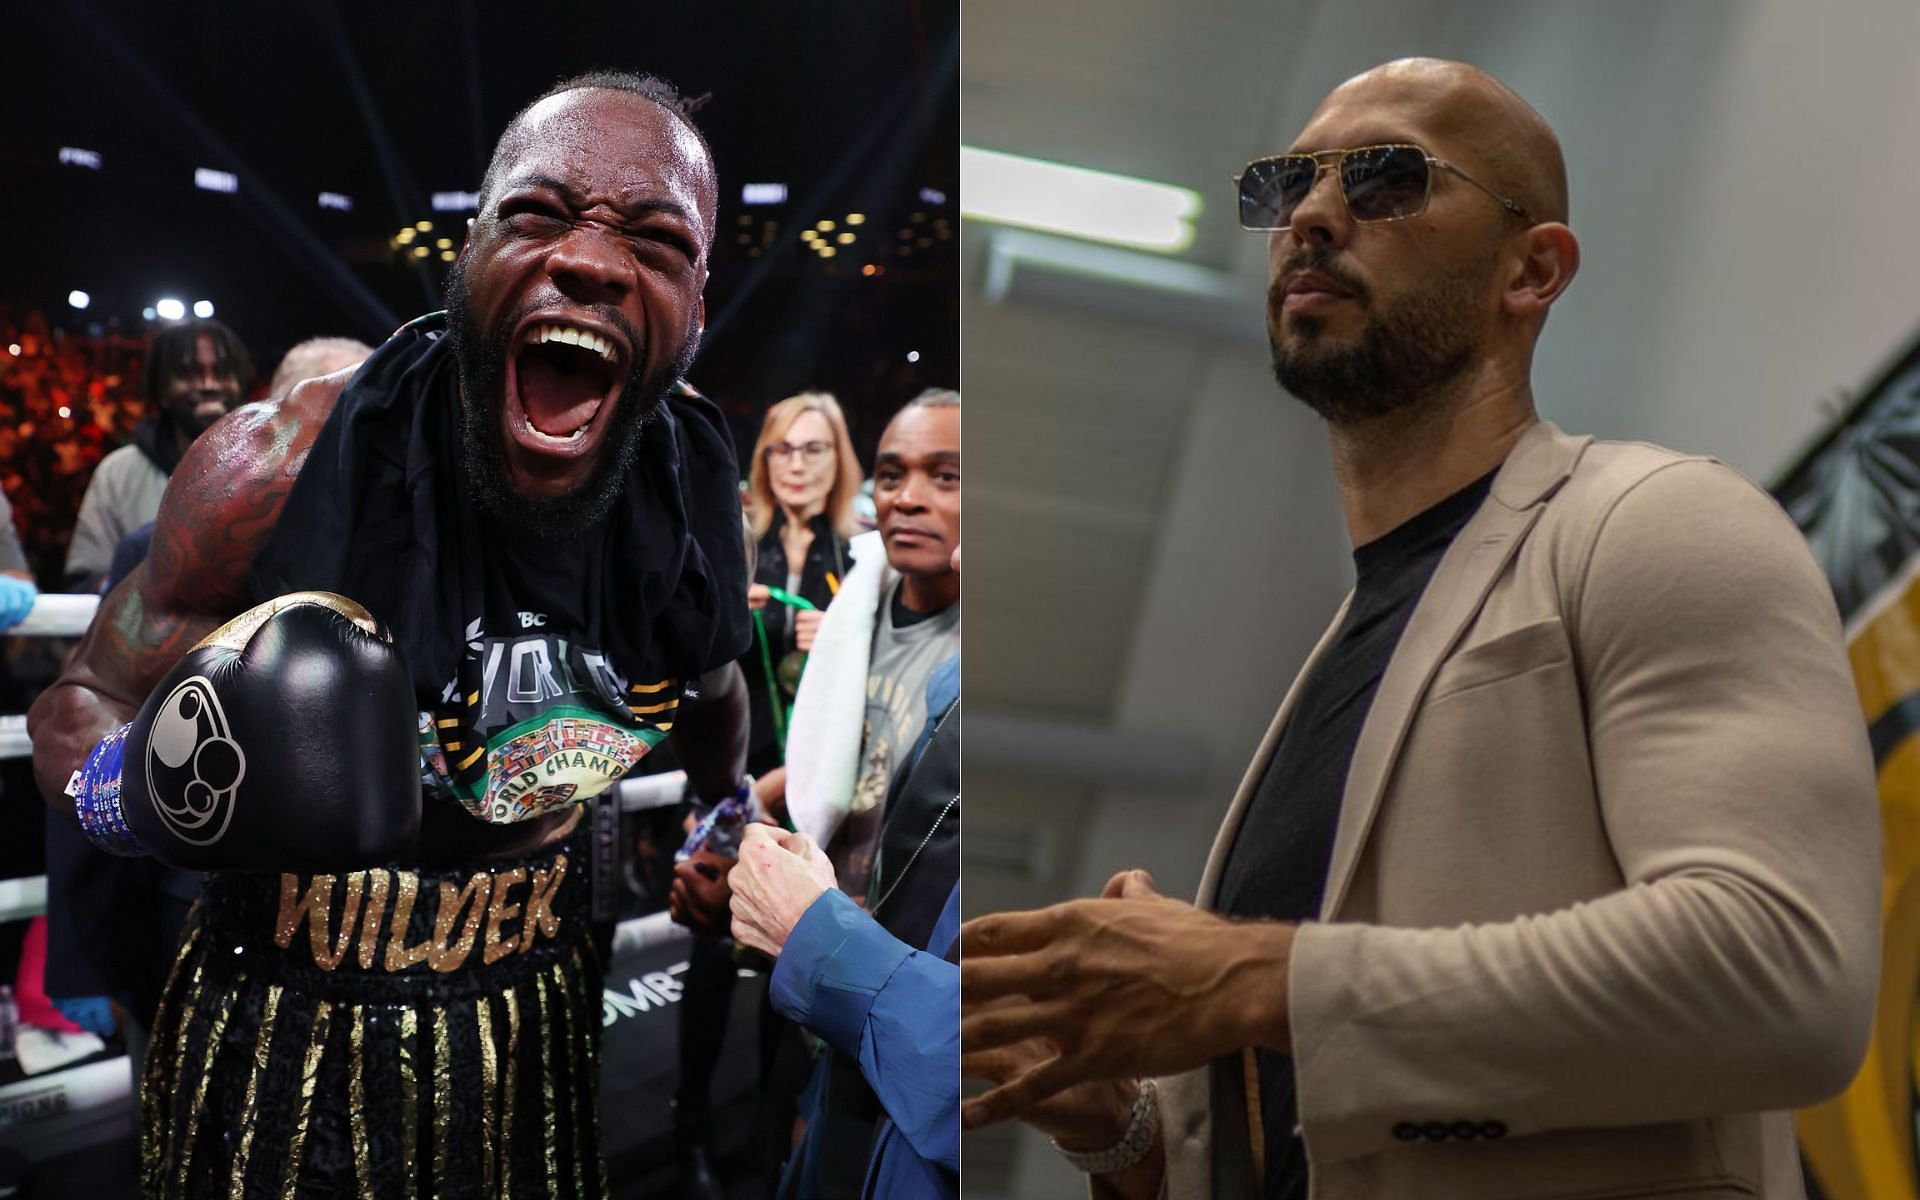 Deontay Wilder has been offered support by Andrew Tate [Image Credit: Getty and http://twitter.com/CobraTate]